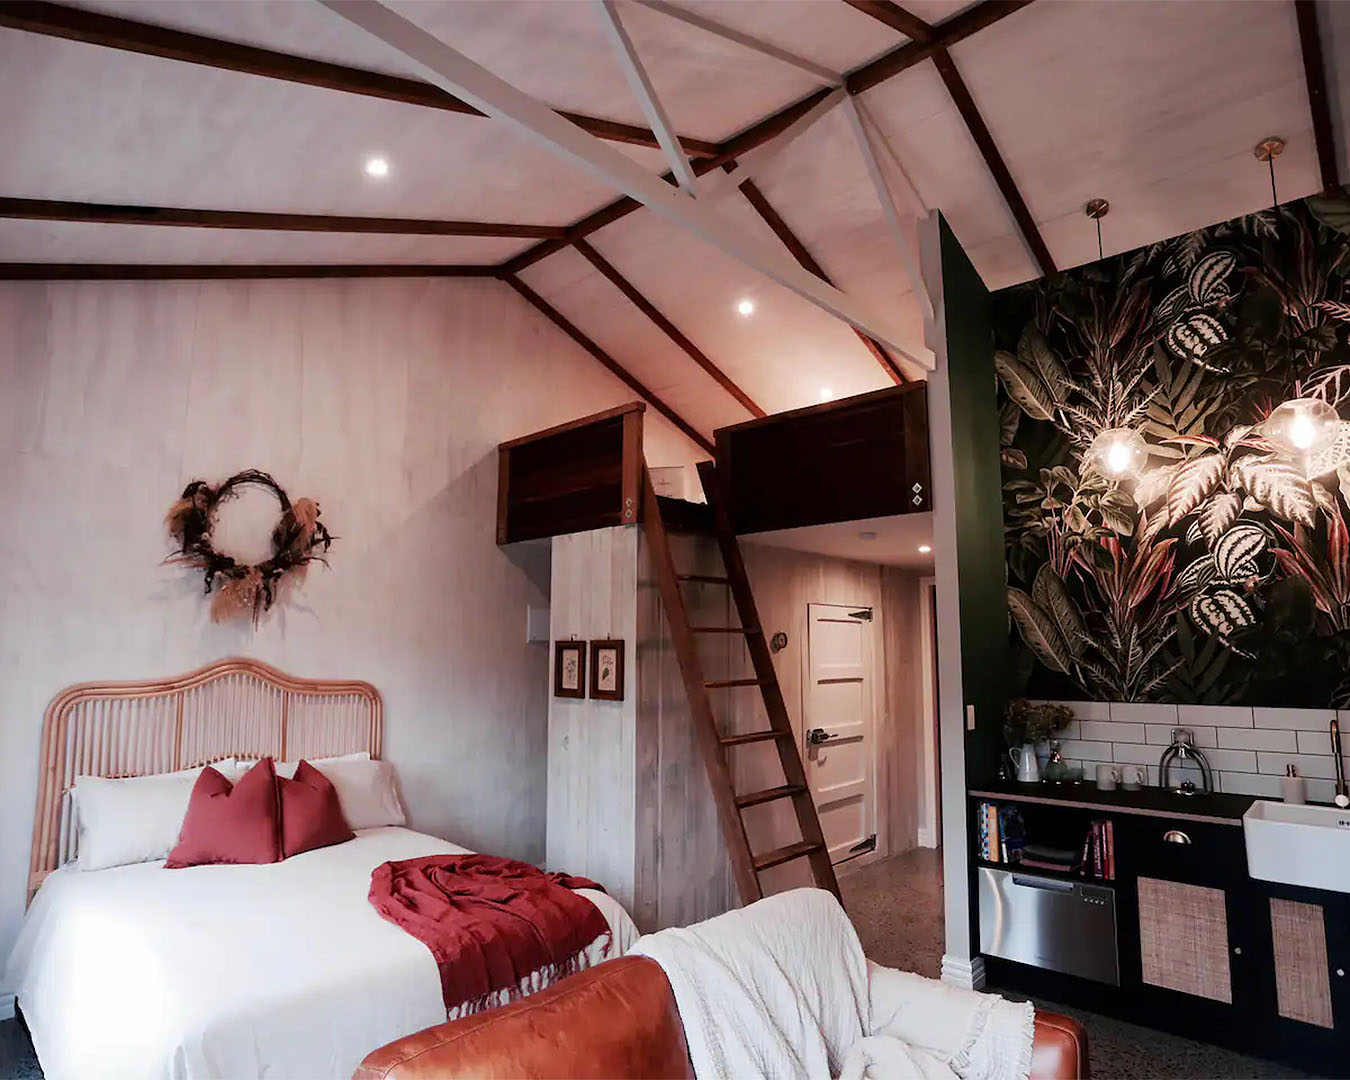 A comfortable room with wooden beams, a cosy bed, art on the wall and a little kitchenette at Harewood Grange, one of the best airbnbs in NZ with a fireplace.